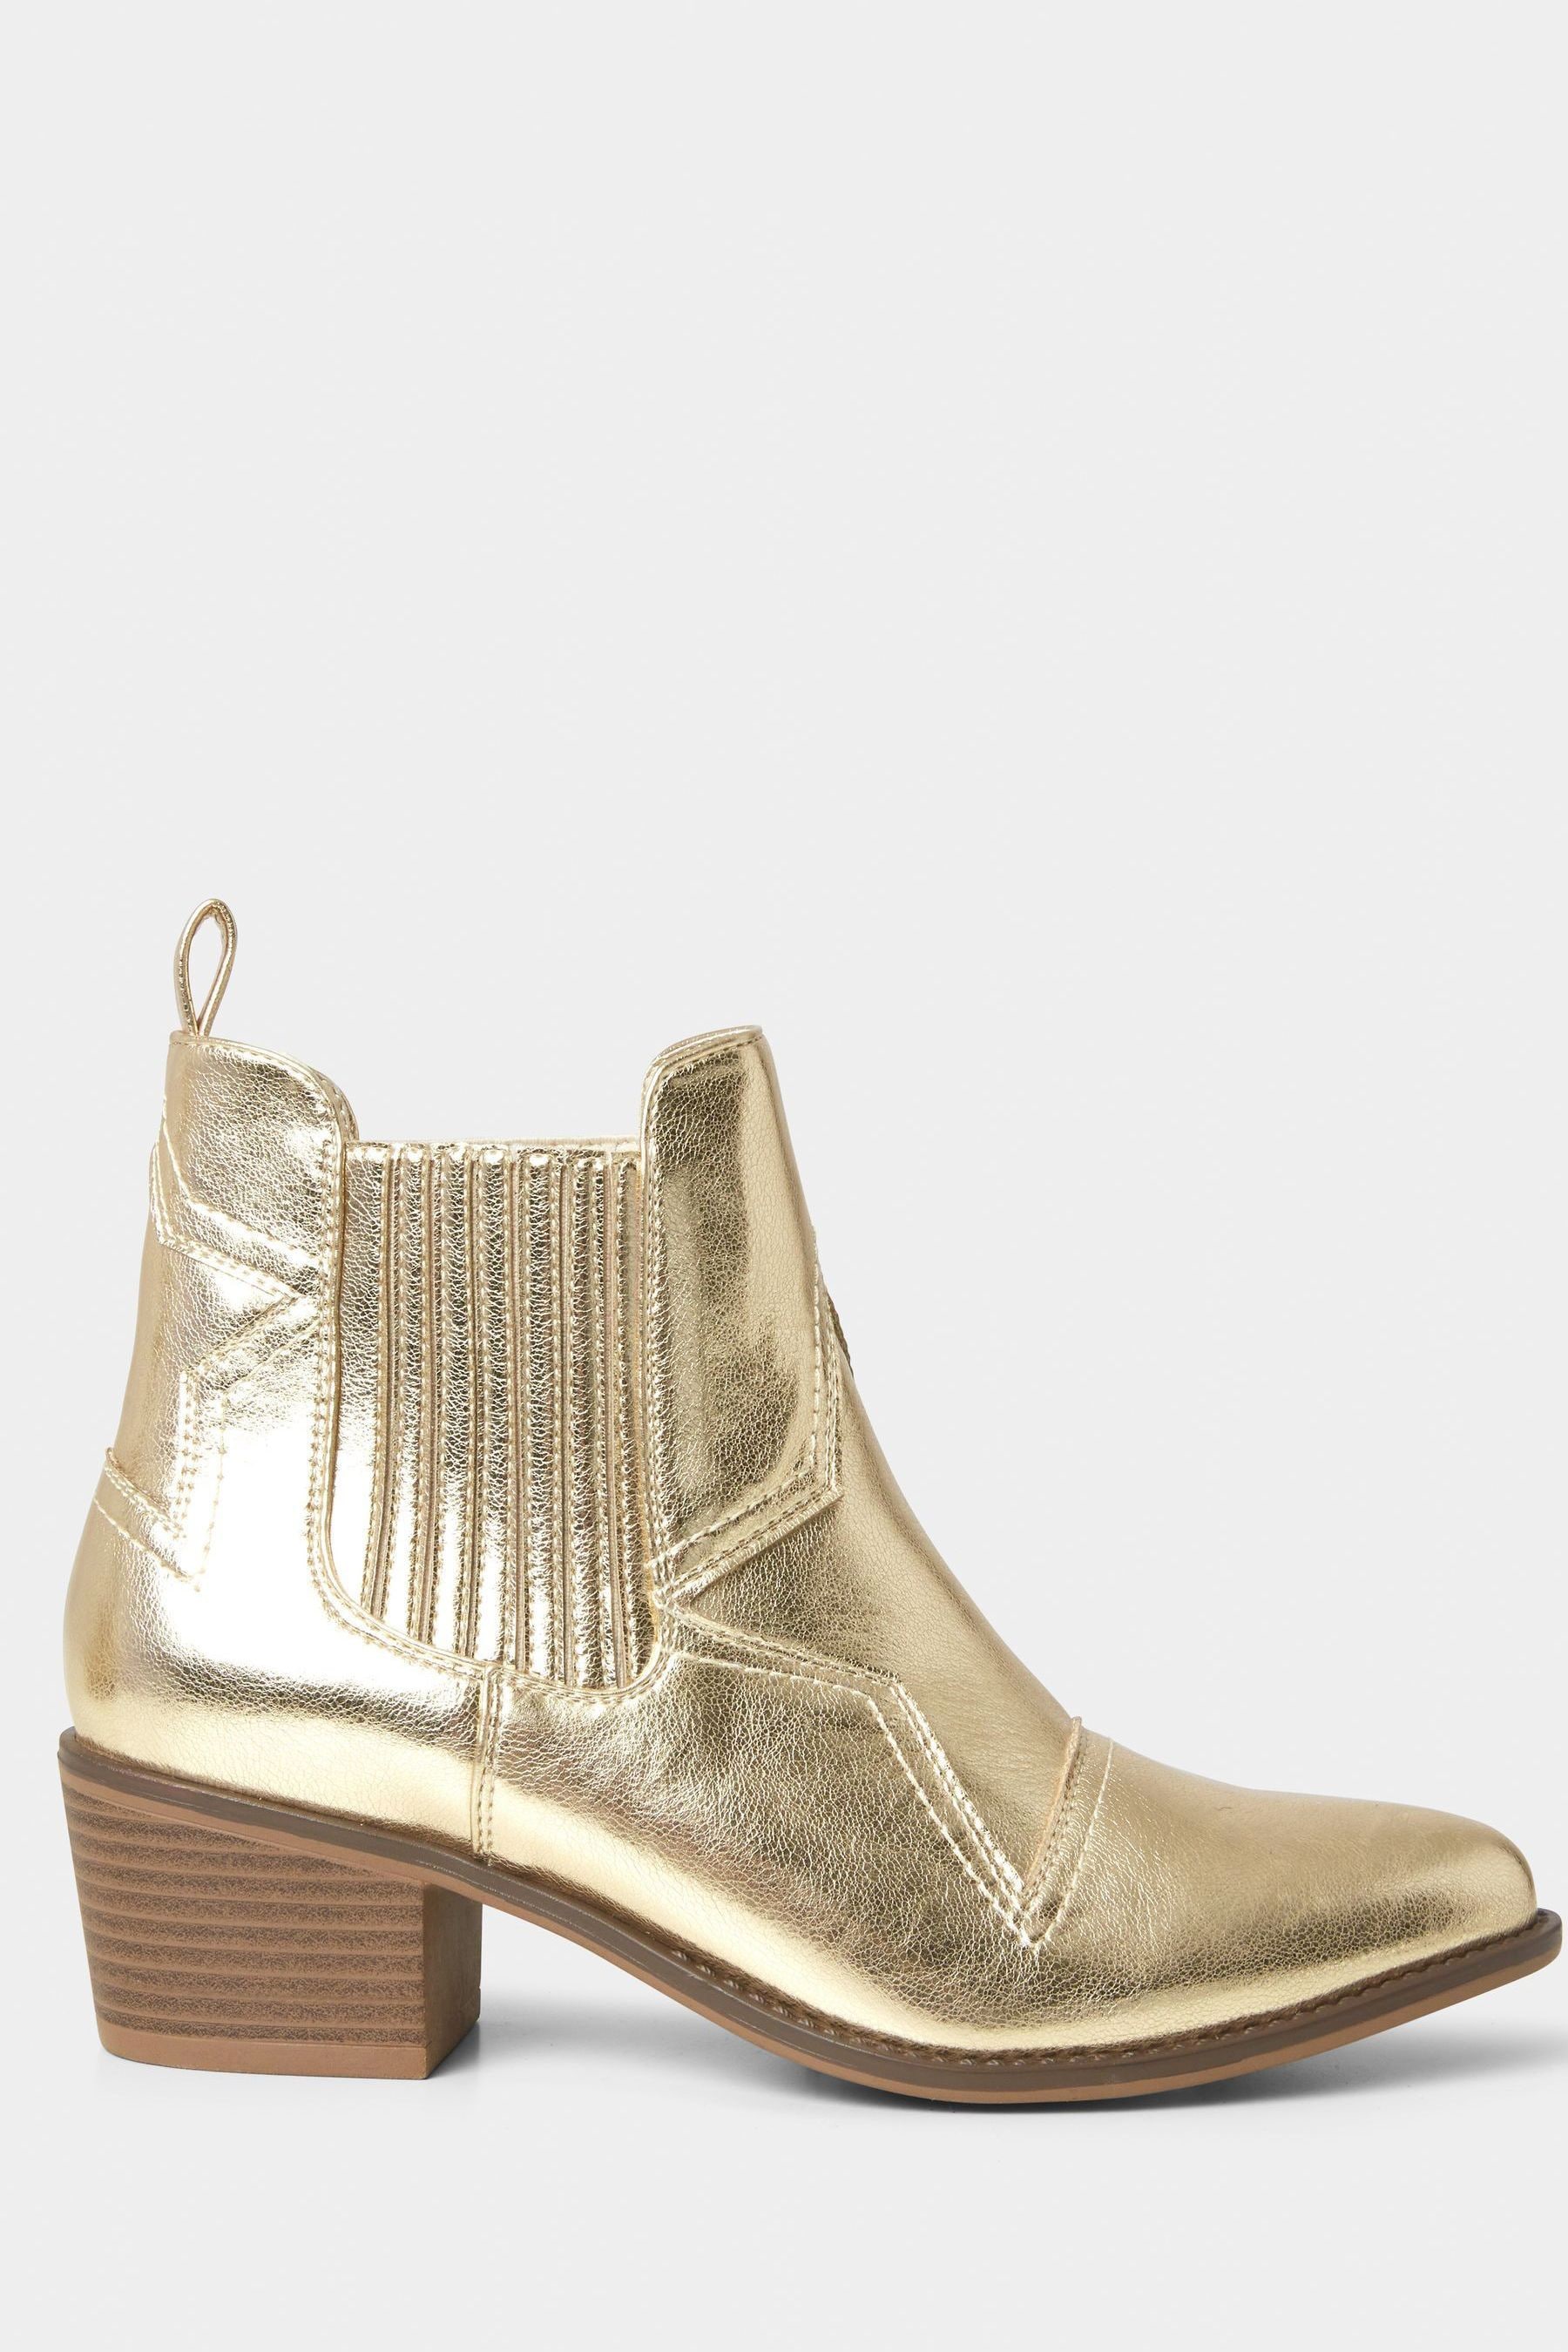 Buy Joe Browns Gold Night Star Western Boots from the Next UK online shop